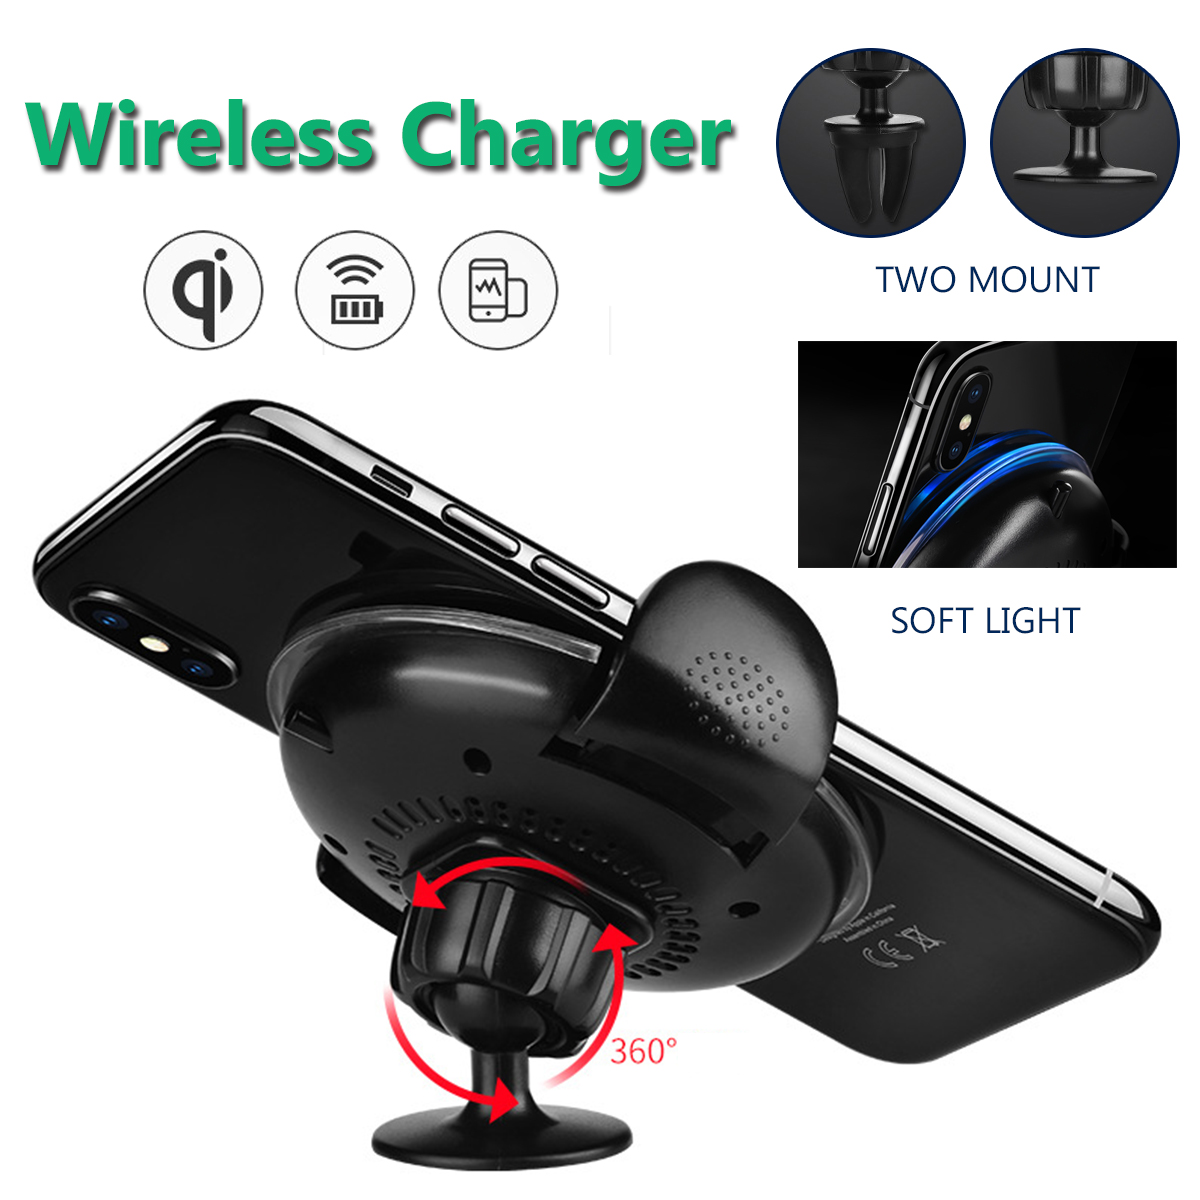 Bakeey Wireless Fast Car Charger Two Mount Holder Stand For iPhone 8/P iPhone X Samsung S8 